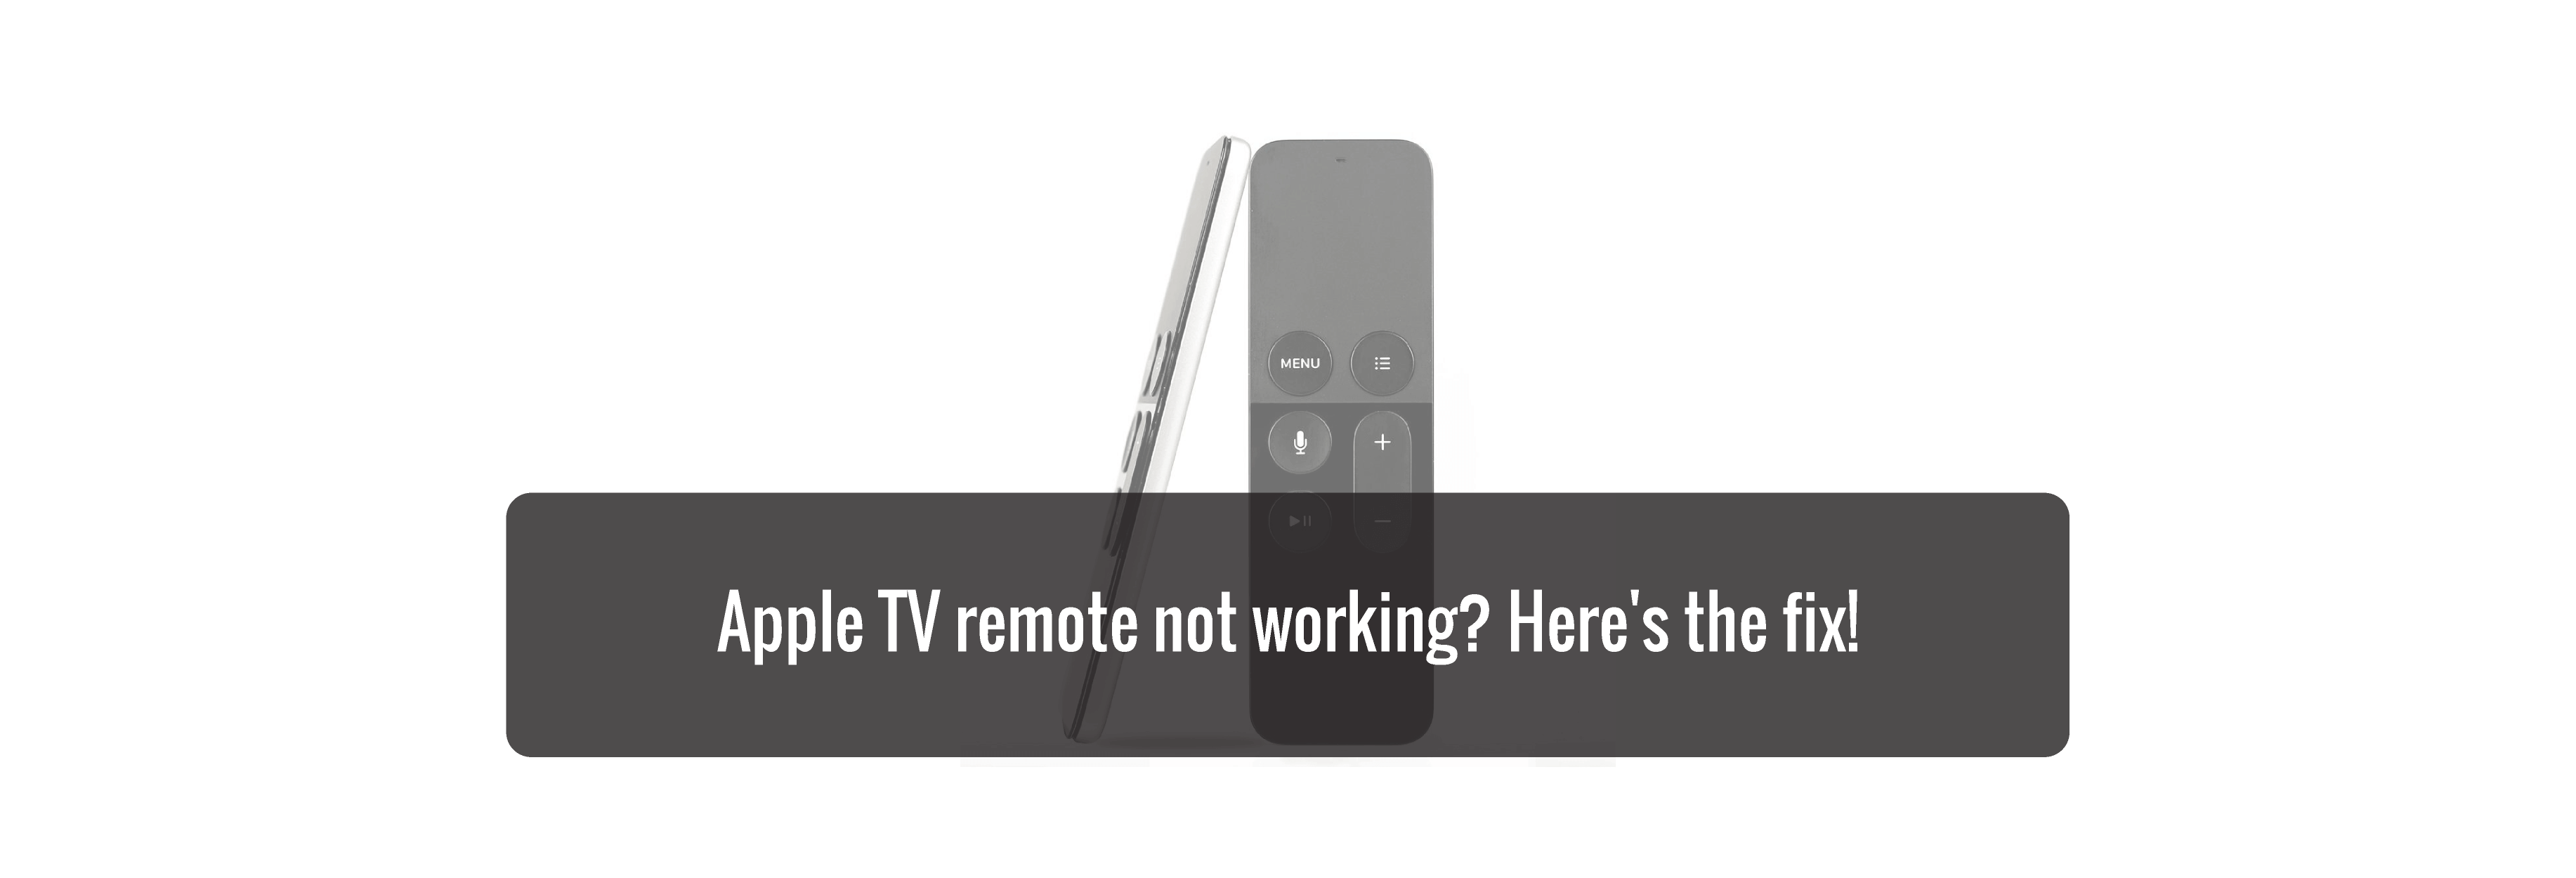 Apple TV remote not working? Here's the fix!